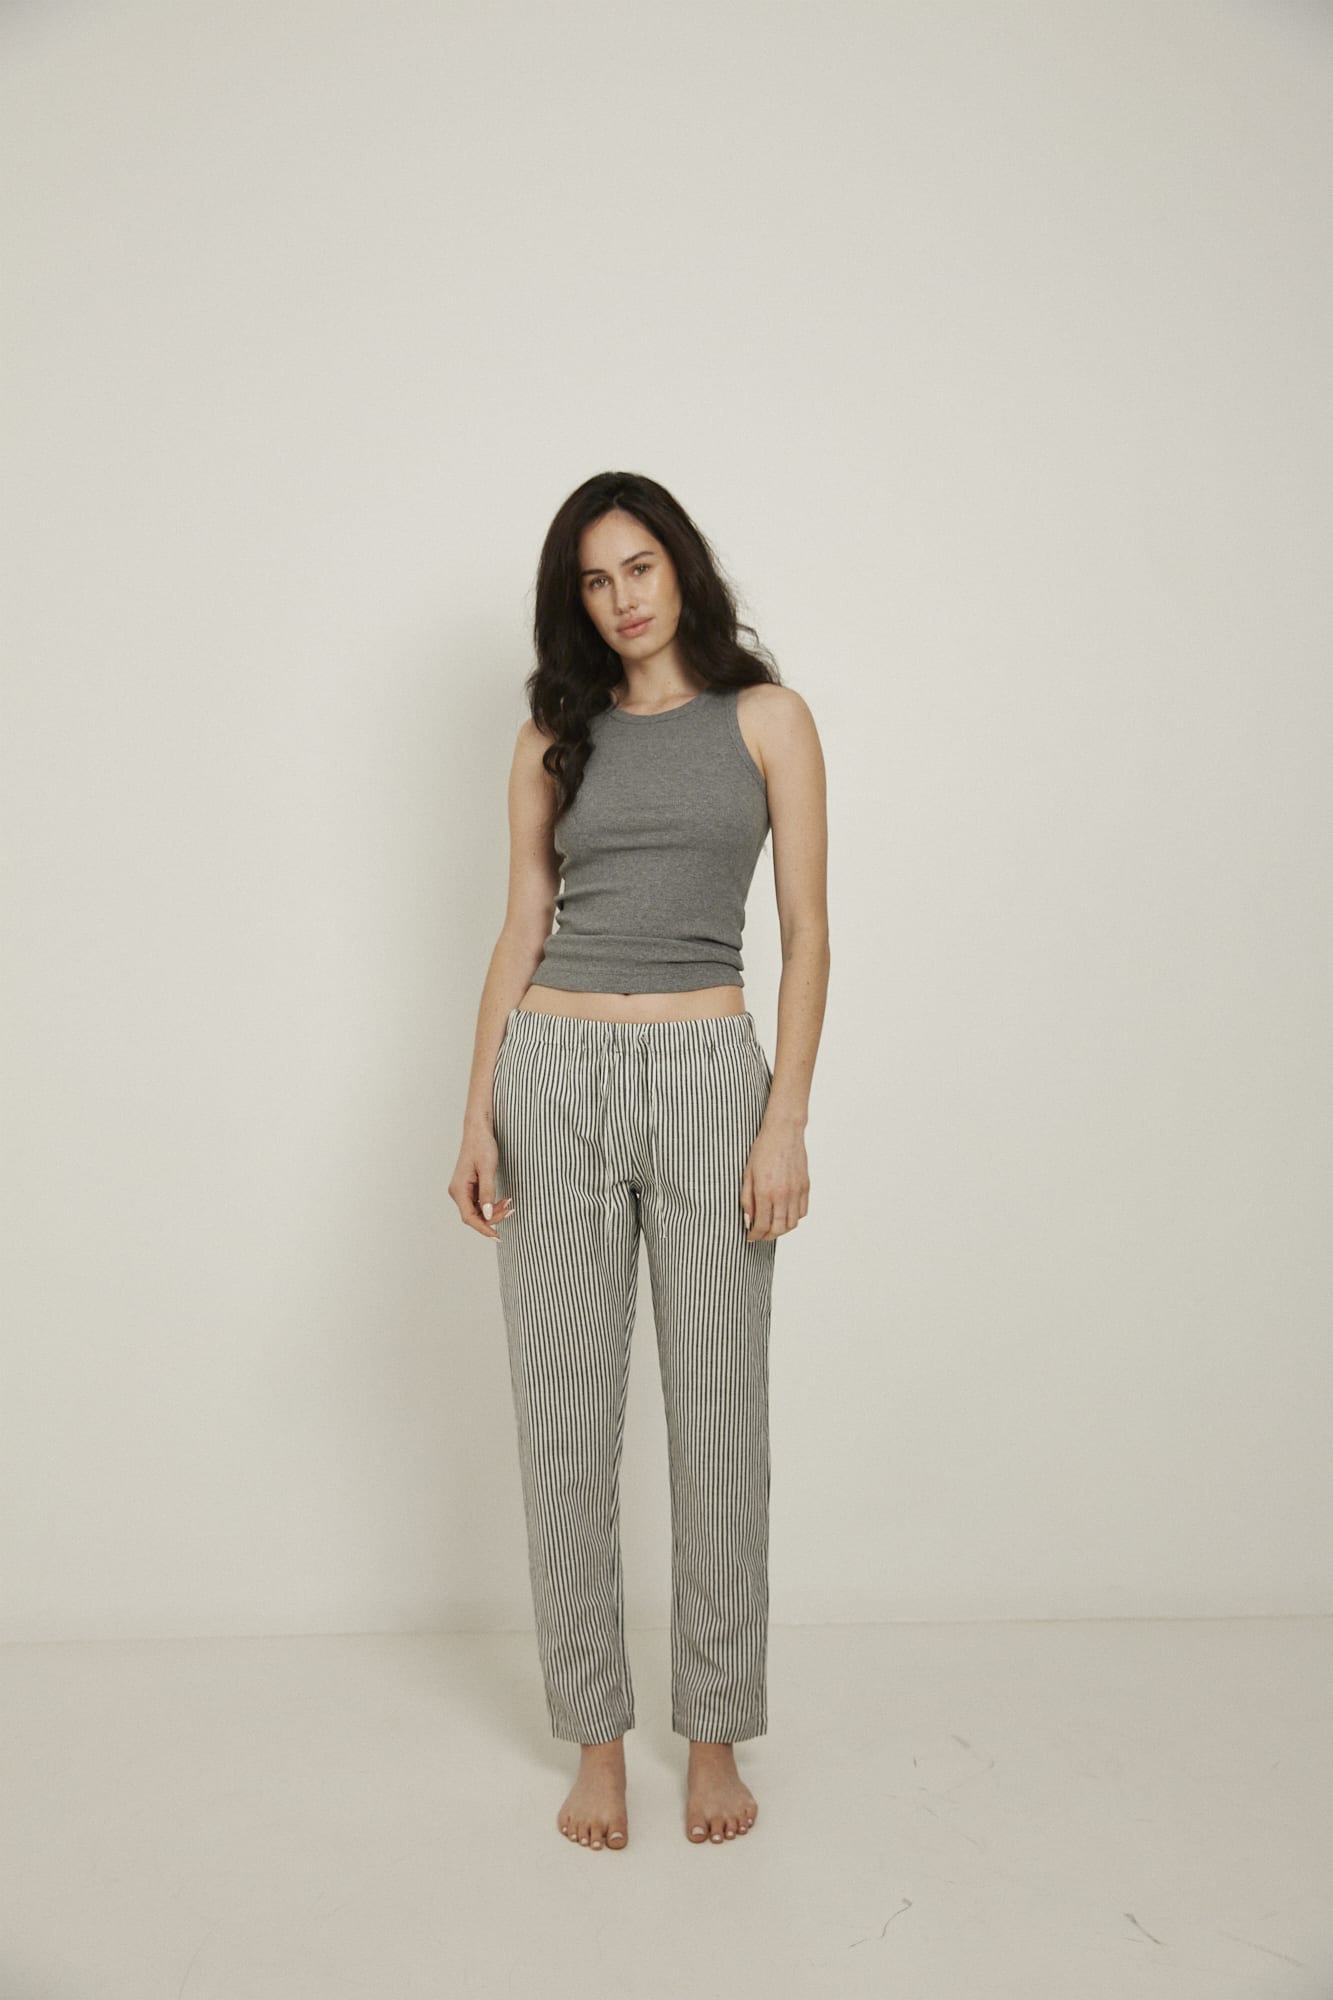 Women’s pyjama pant.  Made from an organic cotton and linen blend, in a black and white stripe.  These pants feature an elasticated waistband with a drawstring for comfort.